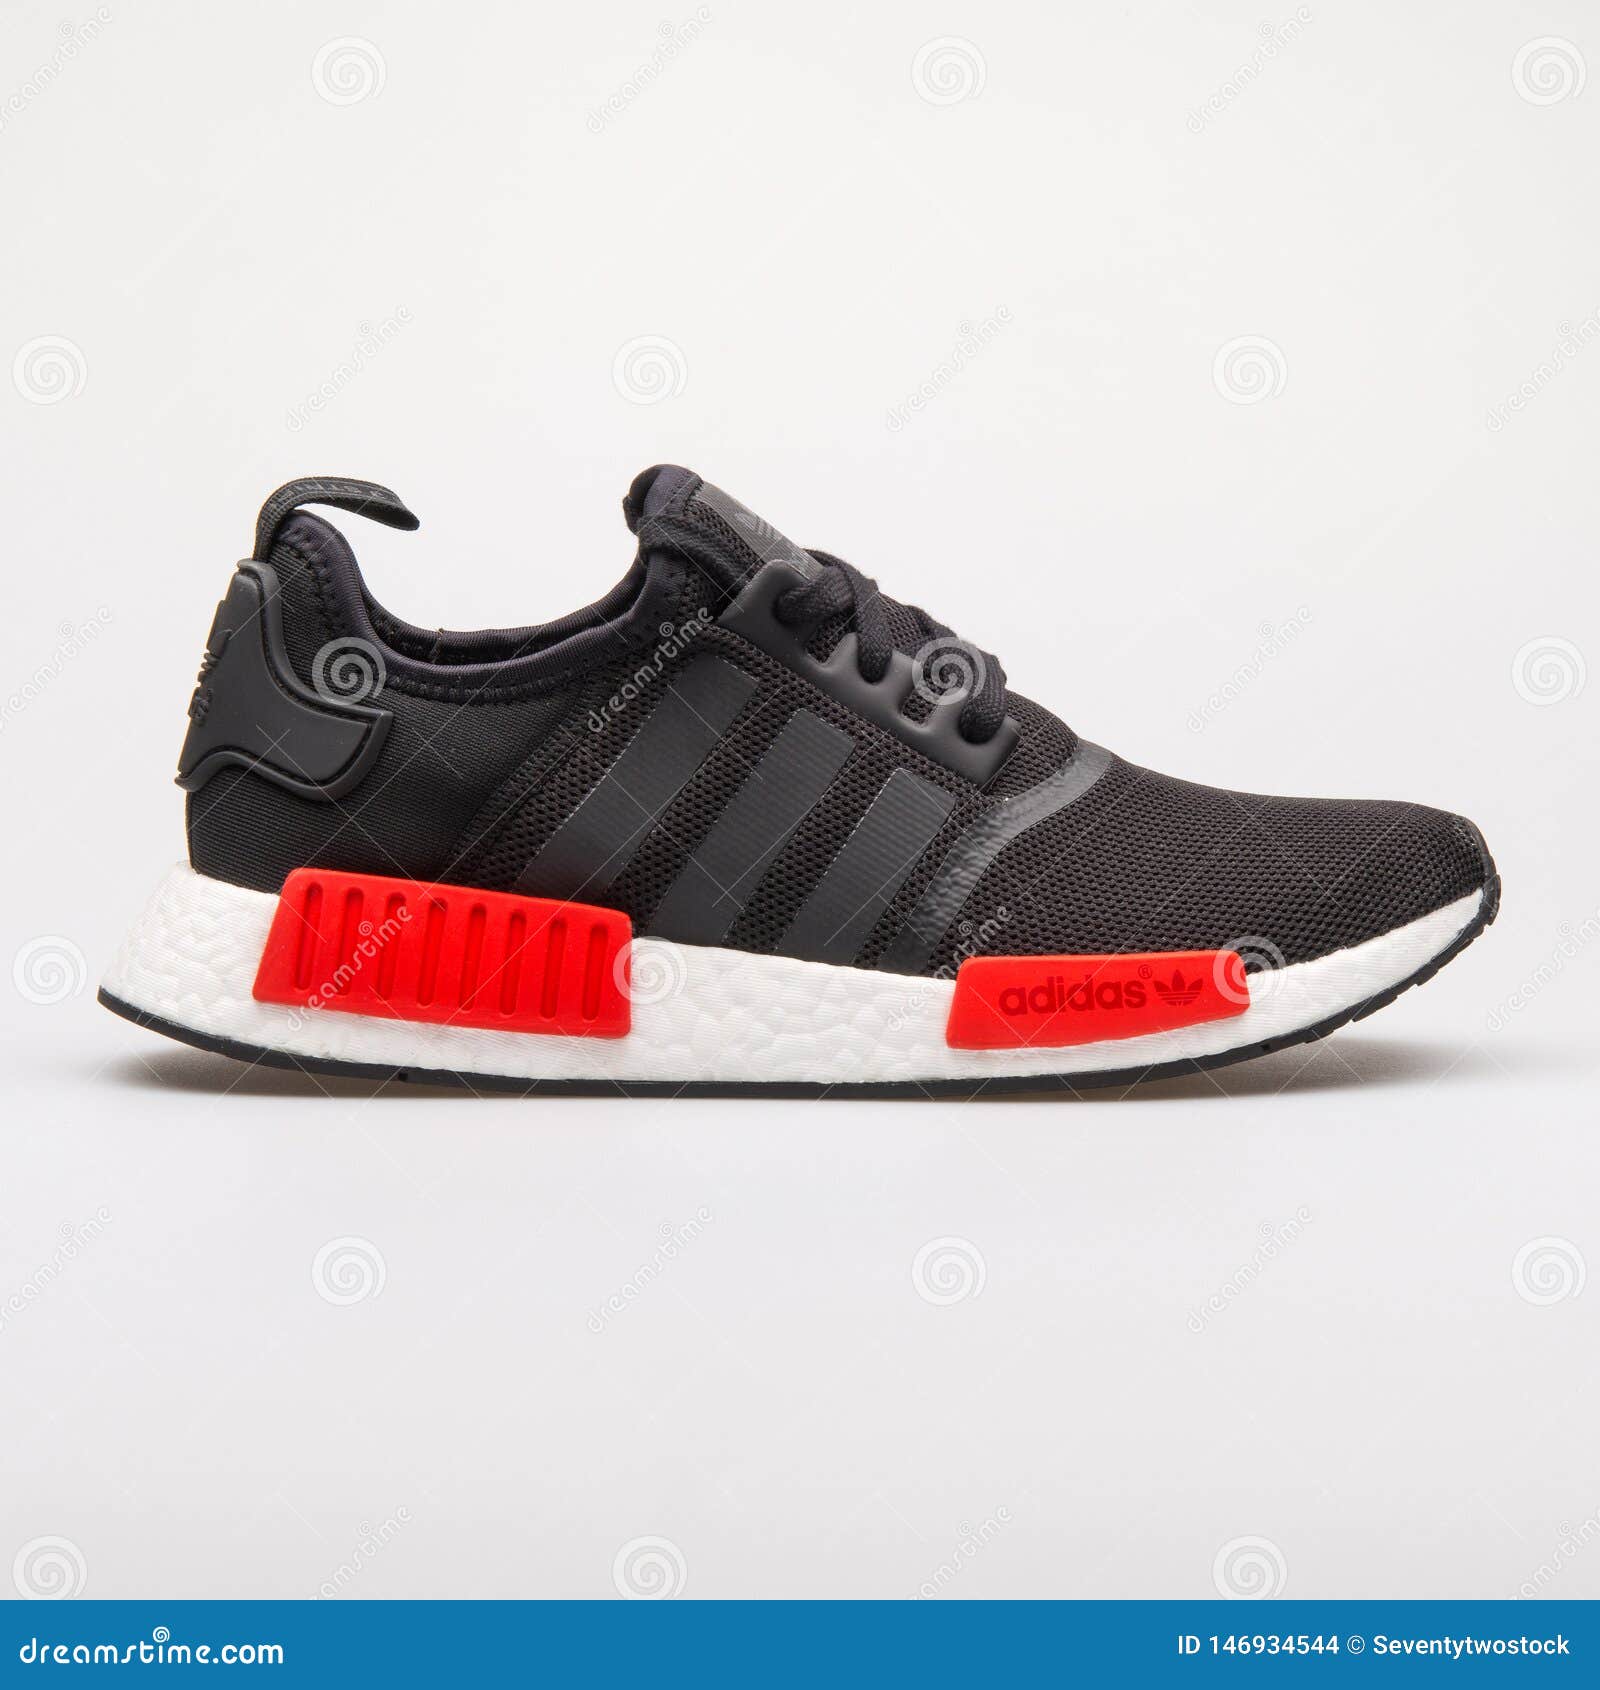 Cheap NMD XR1 JD Sports Black Gray Red and New NMD